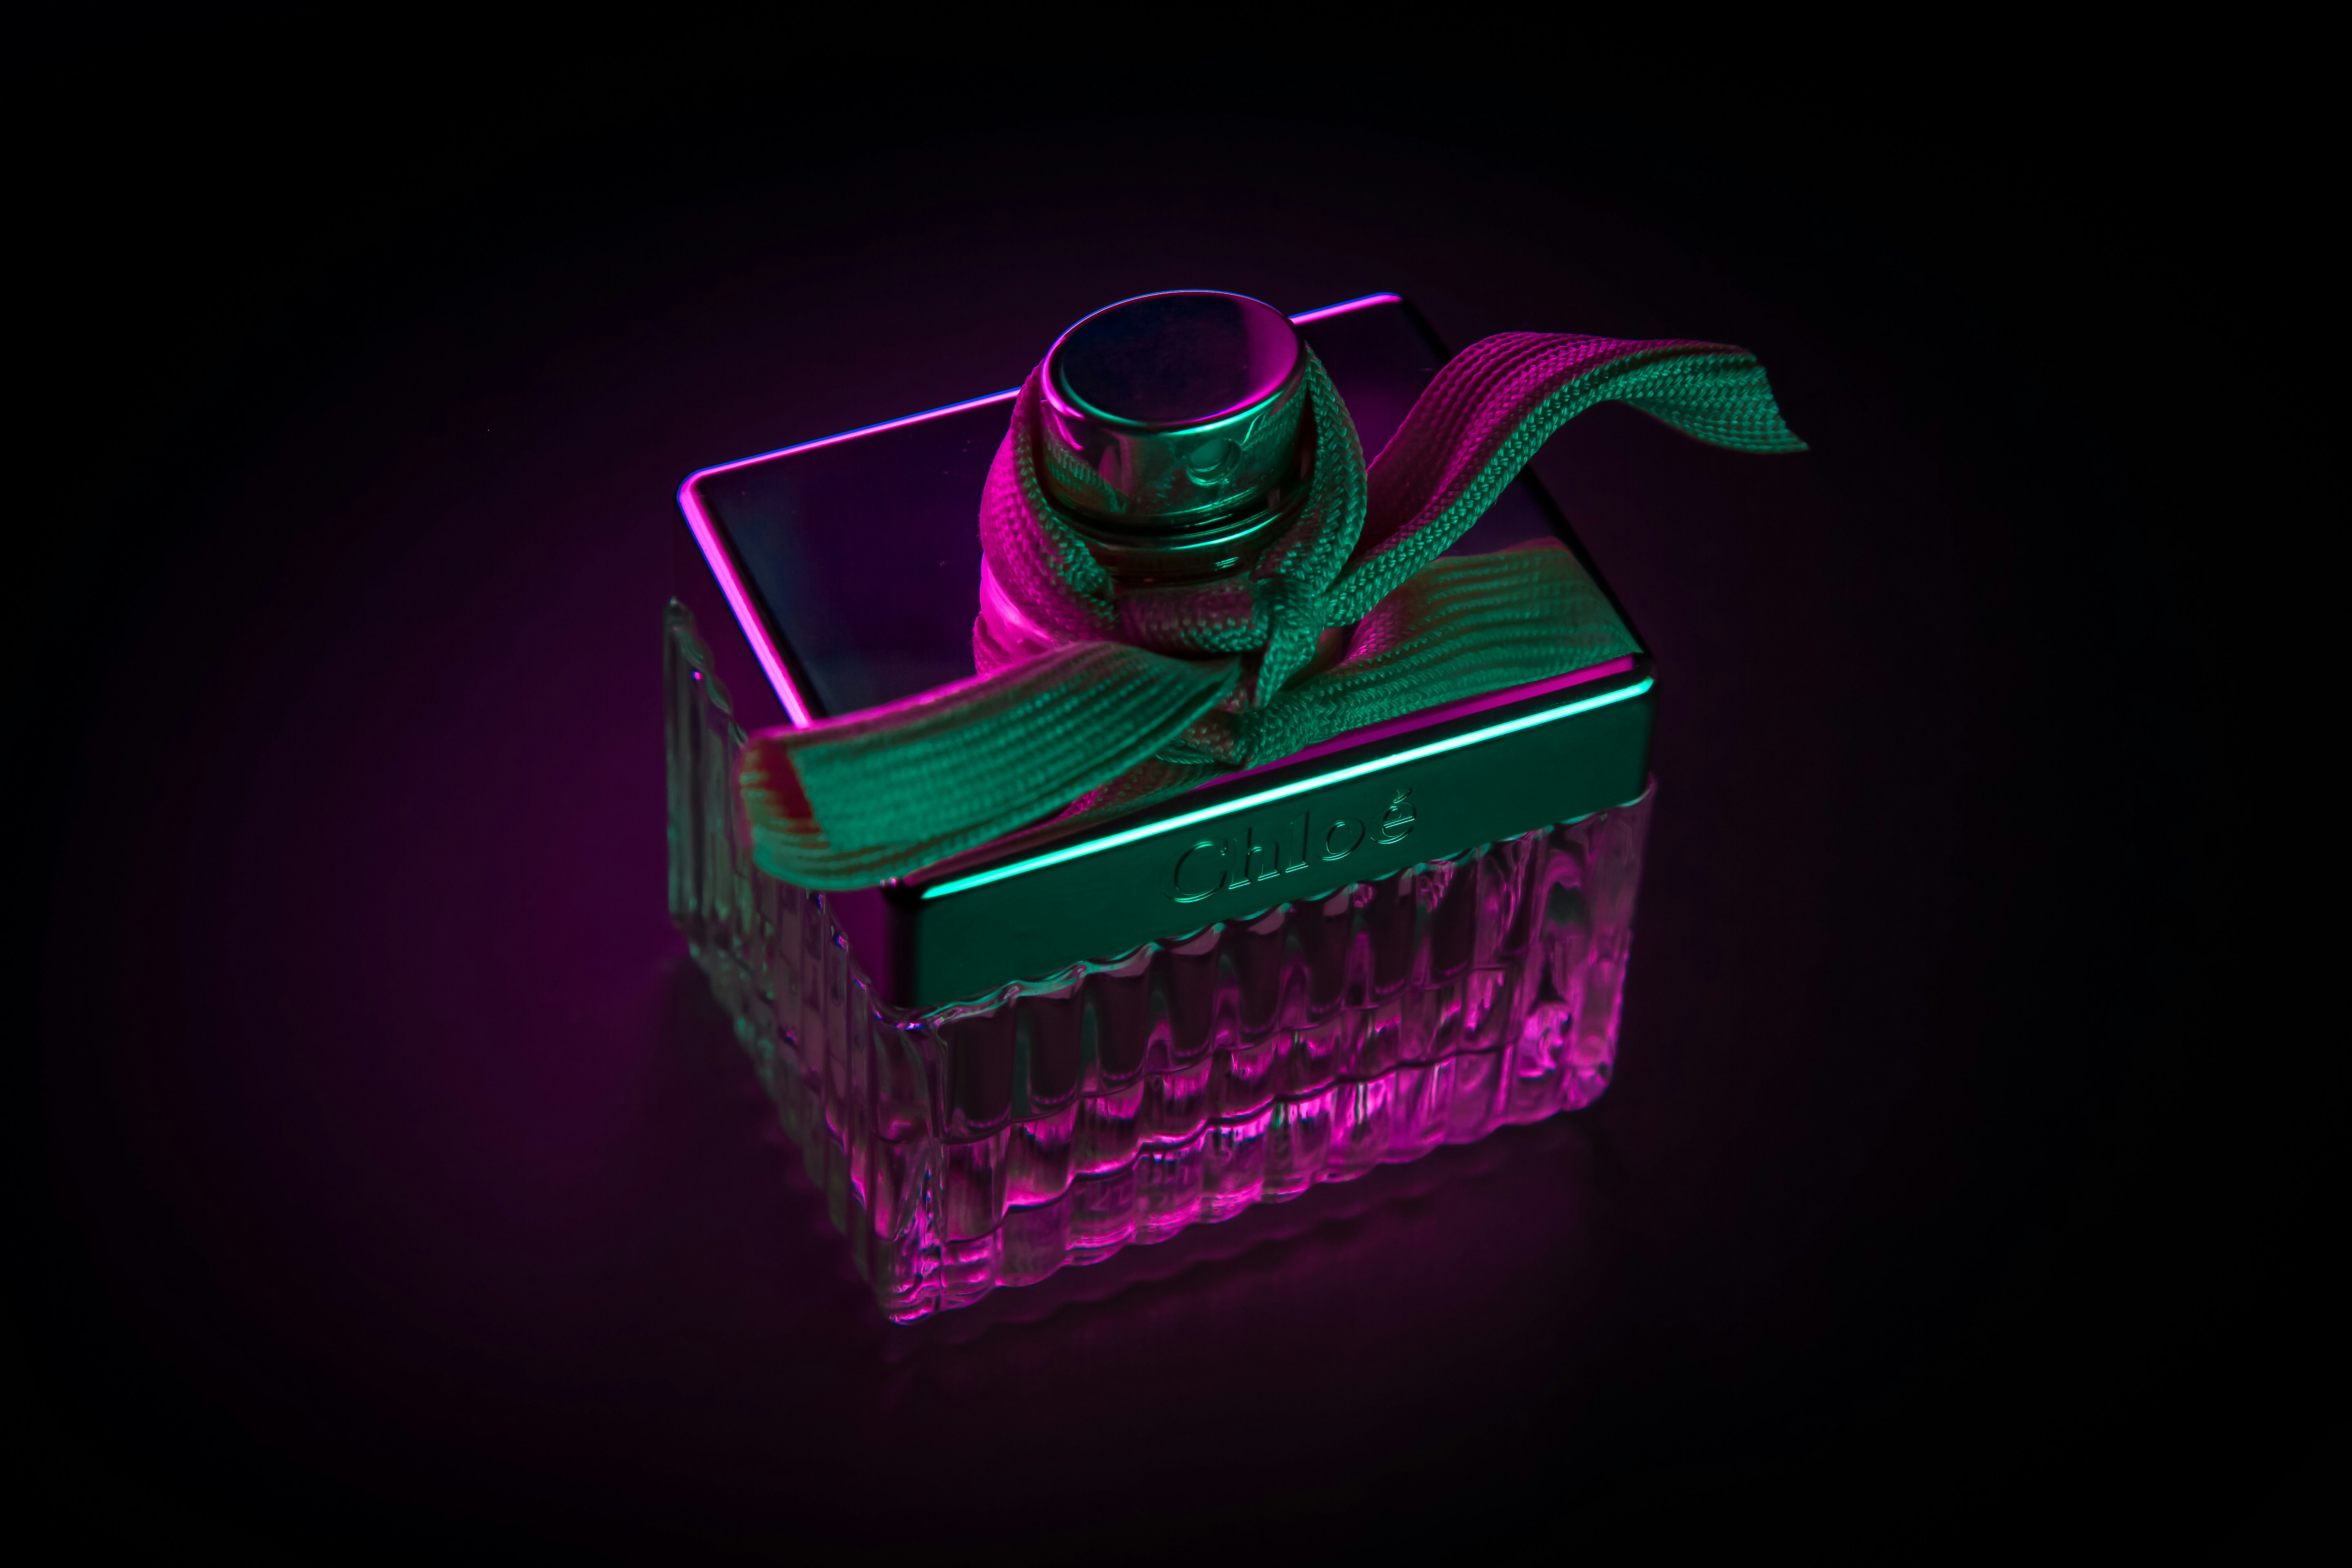 Inspired by the colored gel photography, I painted light over this bottle of perfume with my smartphone and an RGB color app. This is the stuff that will always keep me up until 1am.